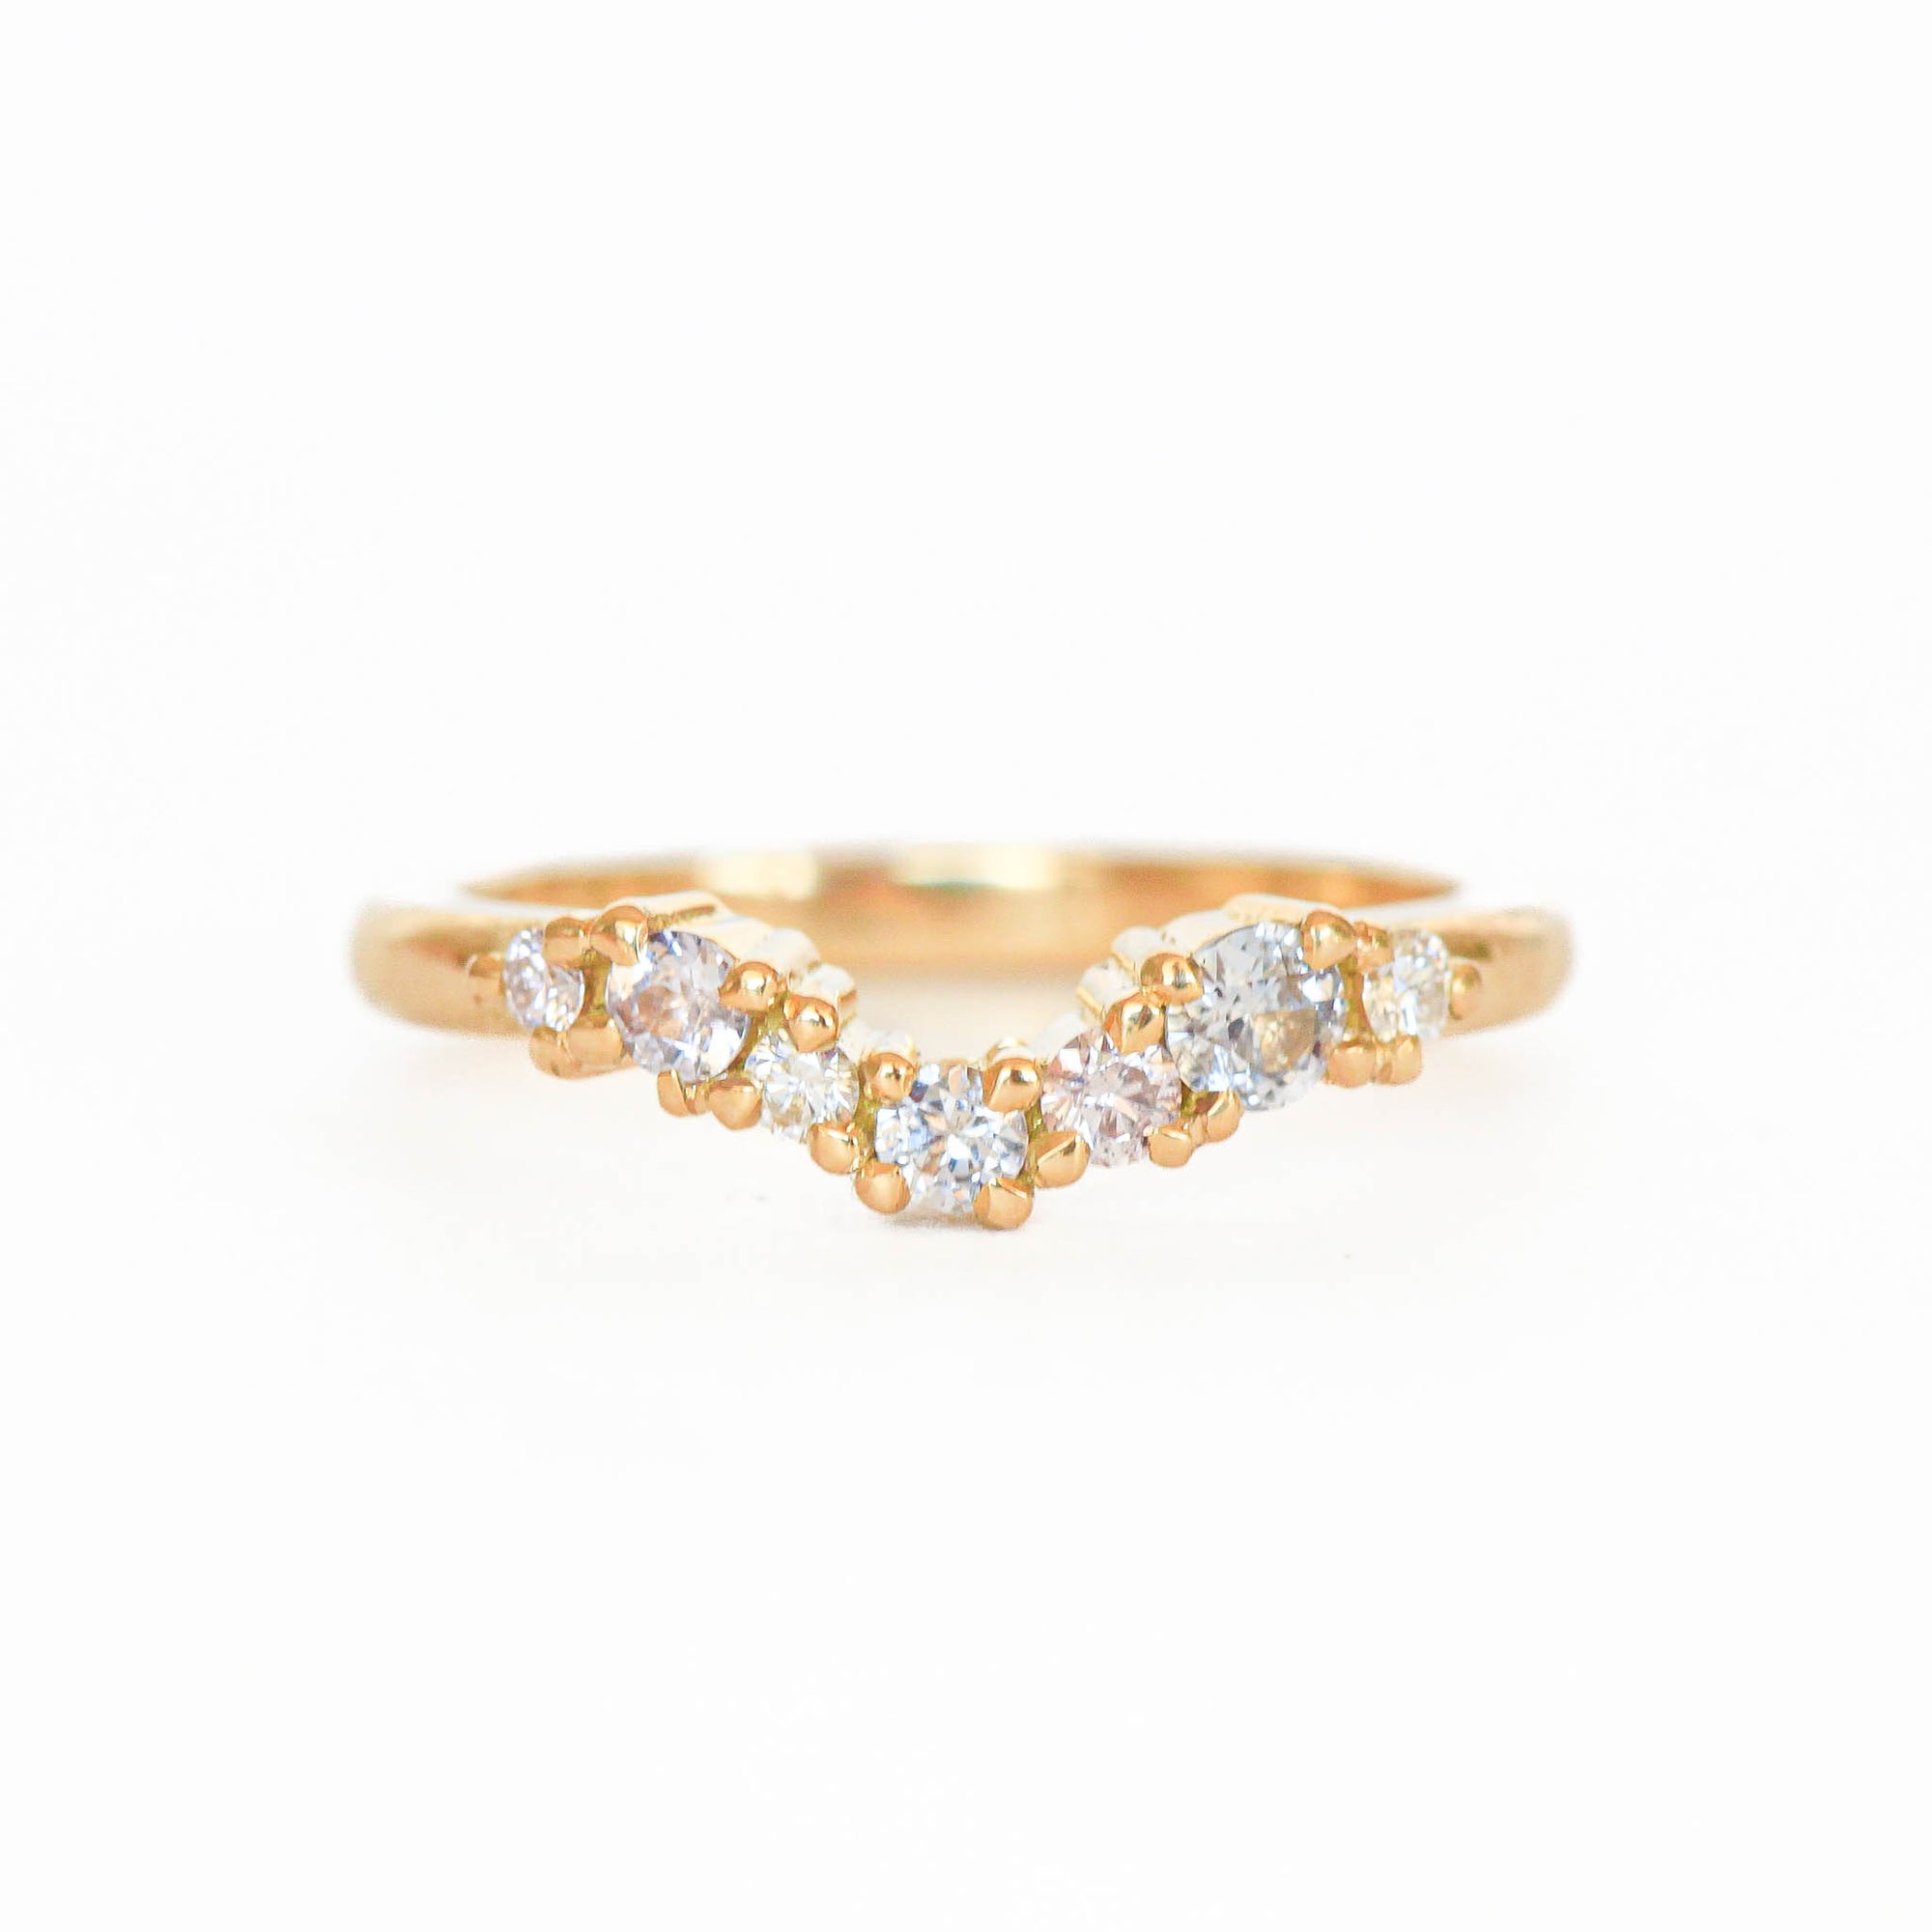 Made in Melbourne, 18ct yellow gold curved engagement ring with a row of diamonds. 